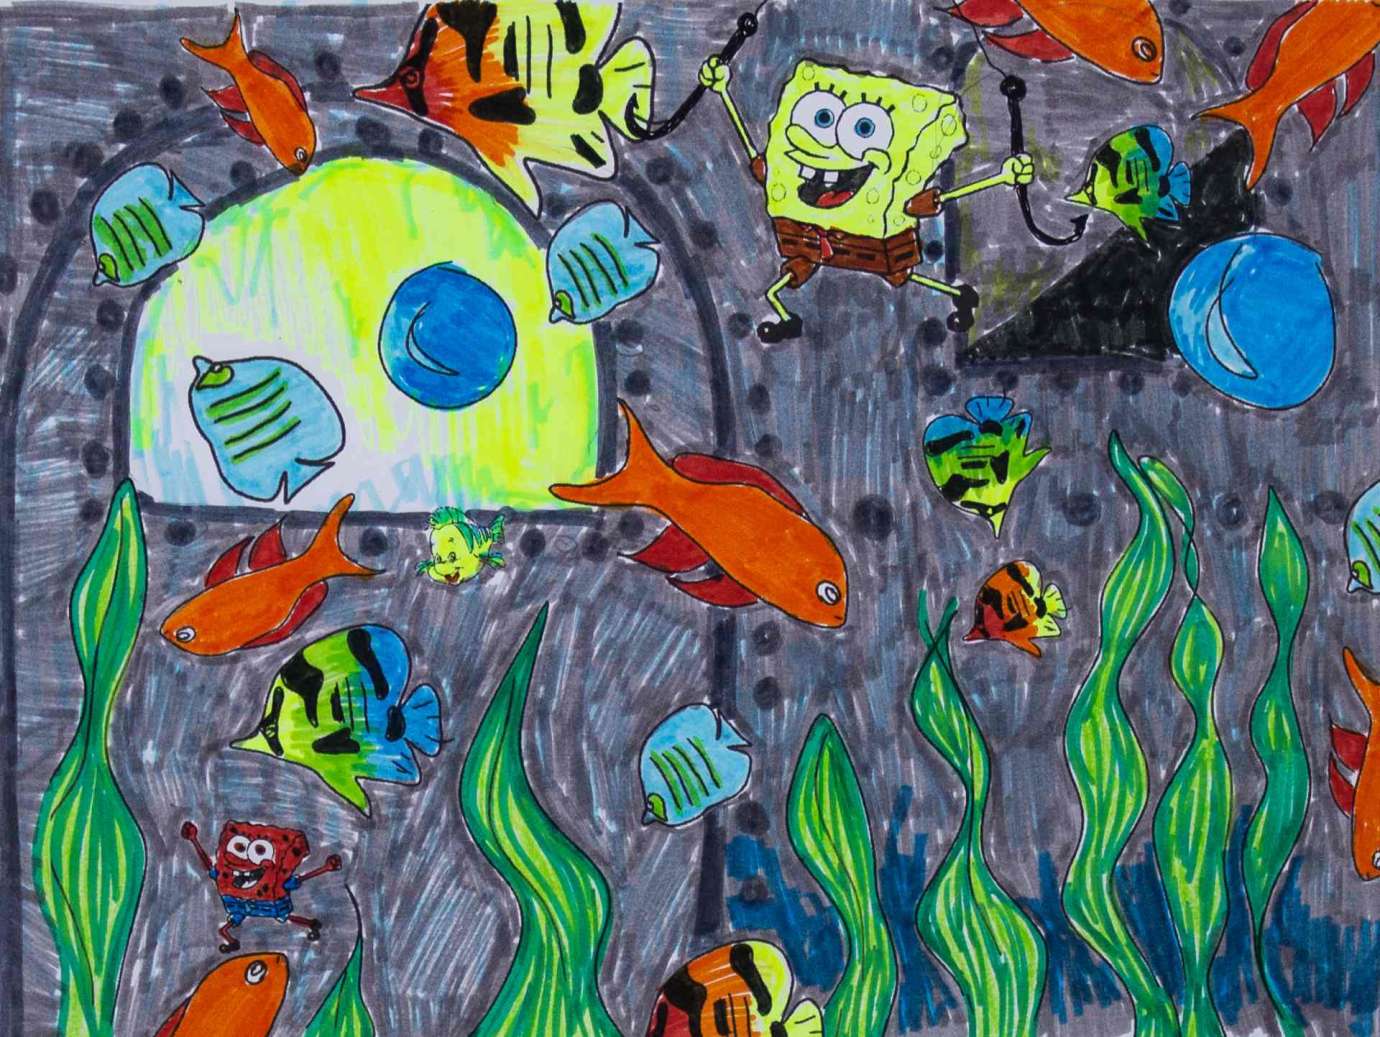 drawing of an underwater scene with red fish, jelly fish, and Spongebob Squarepants